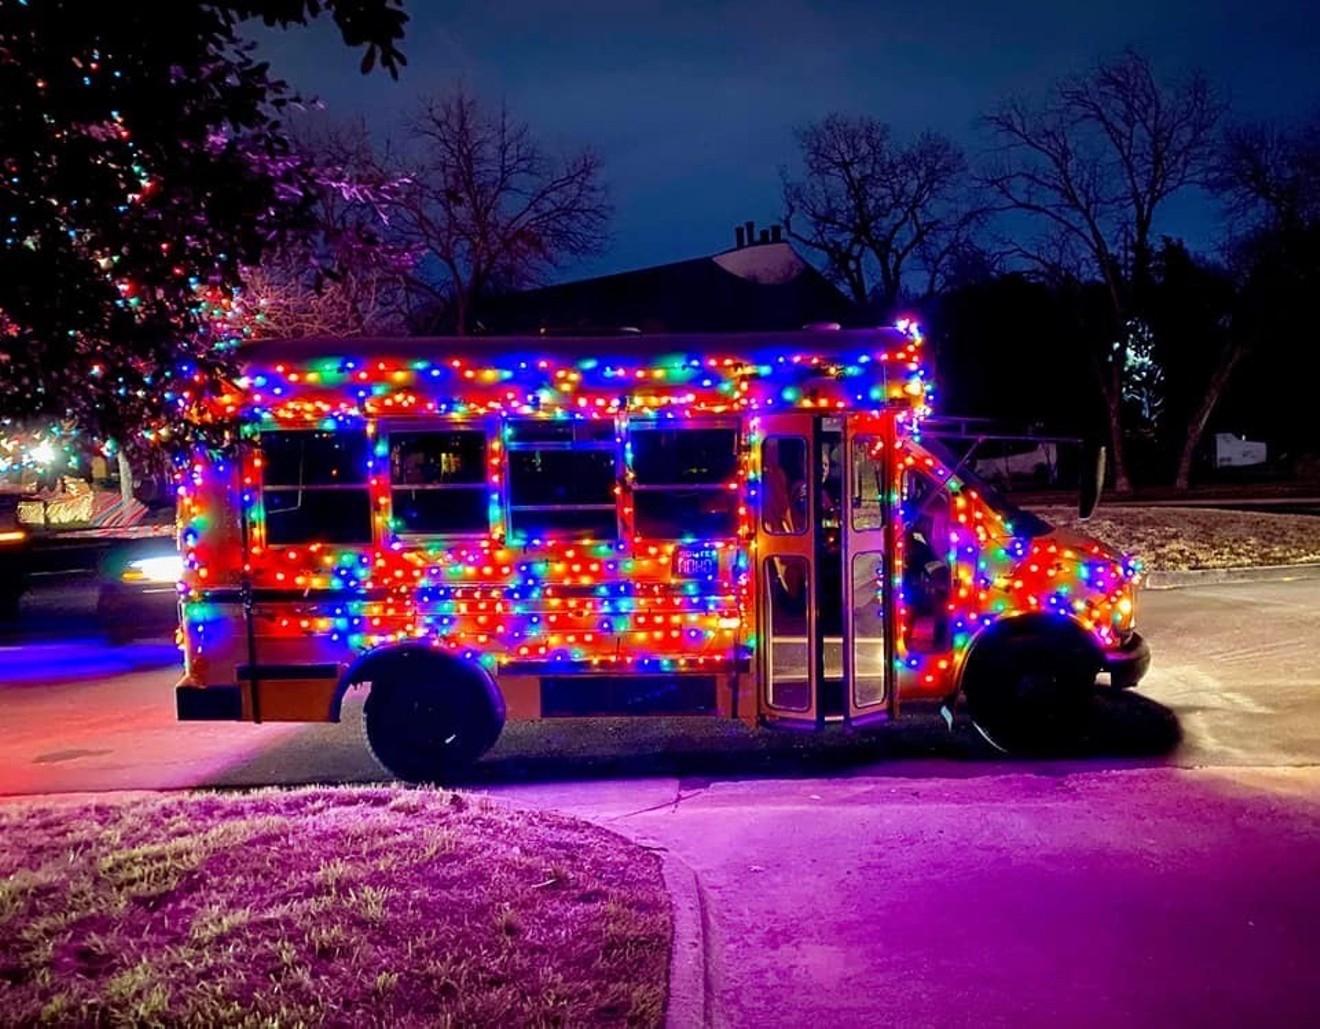 What better way to see the best Dallas lights than in a bus made of lights?